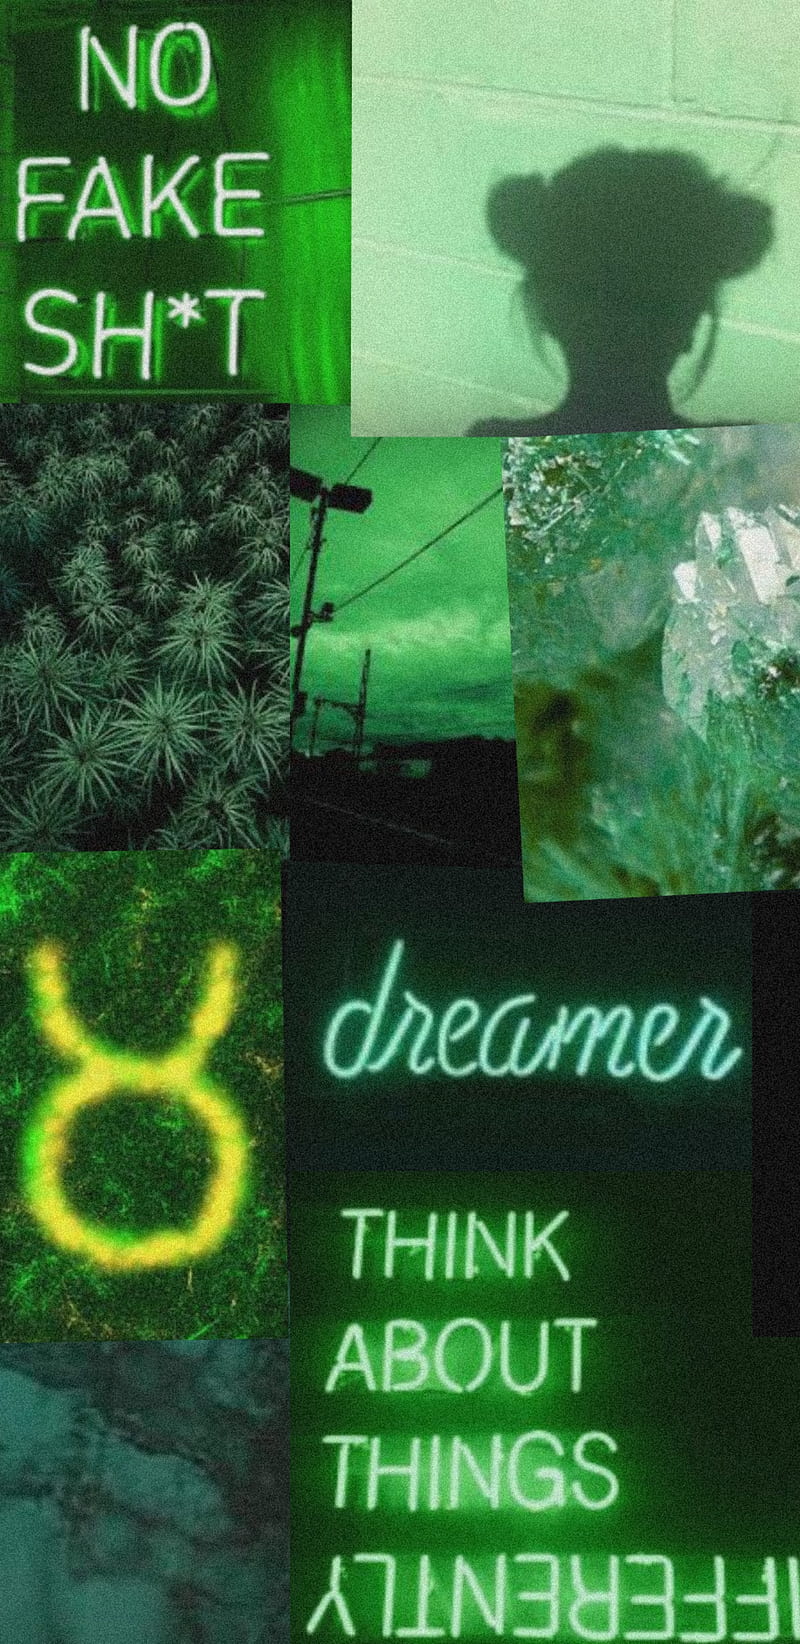 A collage of green aesthetic pictures including neon signs, plants, and a zodiac sign. - Neon green, green, lime green, Taurus